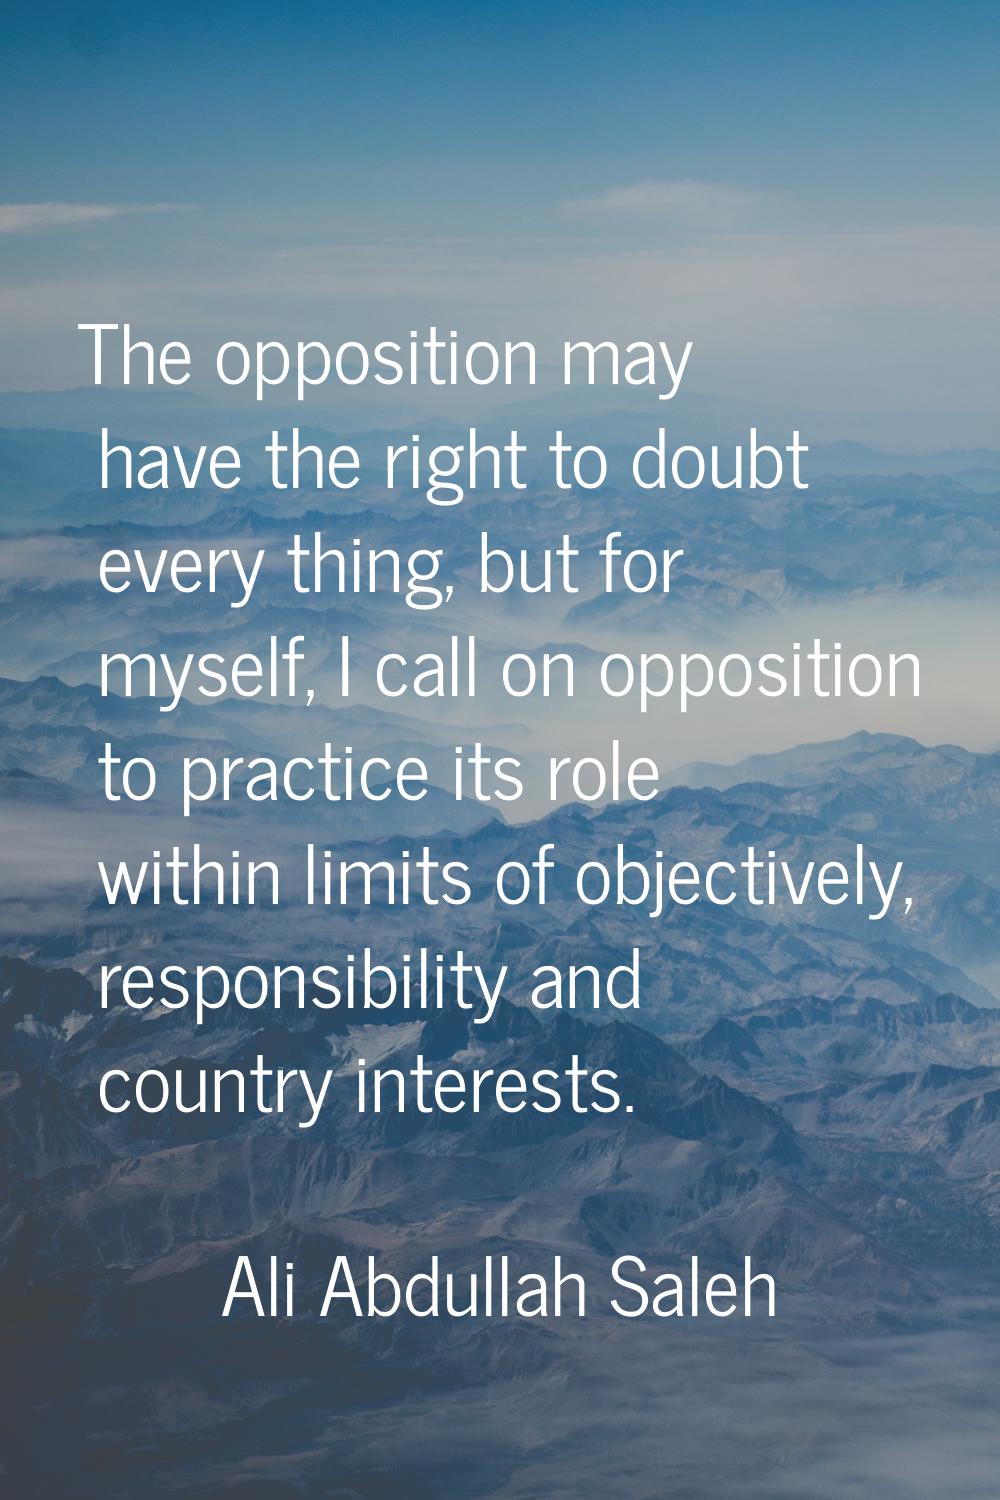 The opposition may have the right to doubt every thing, but for myself, I call on opposition to pra